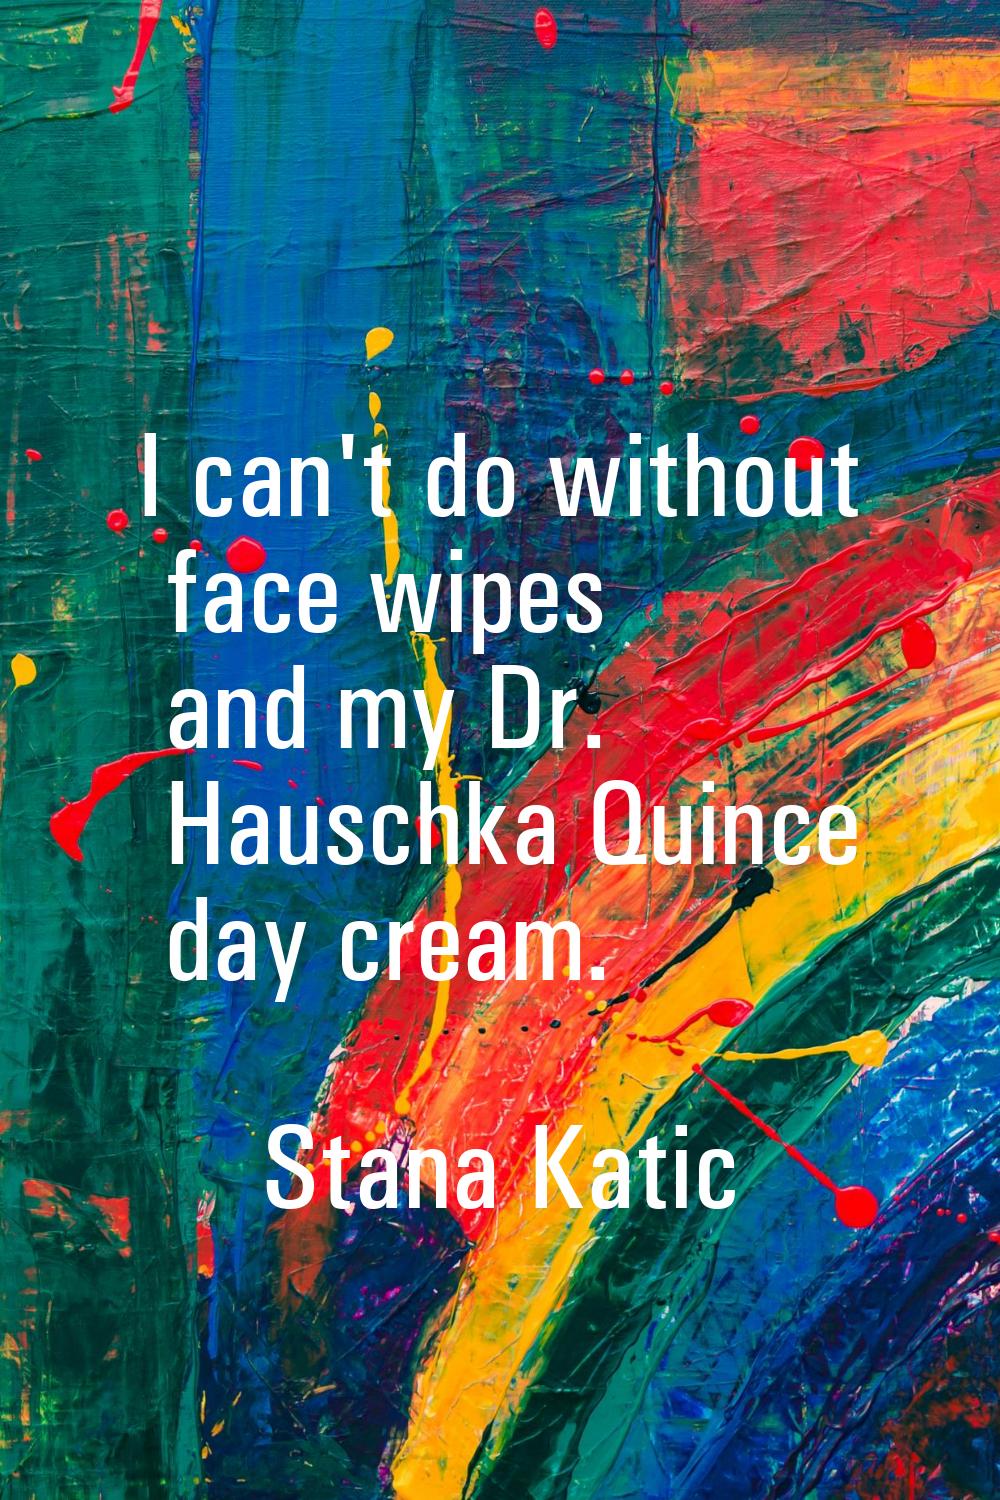 I can't do without face wipes and my Dr. Hauschka Quince day cream.